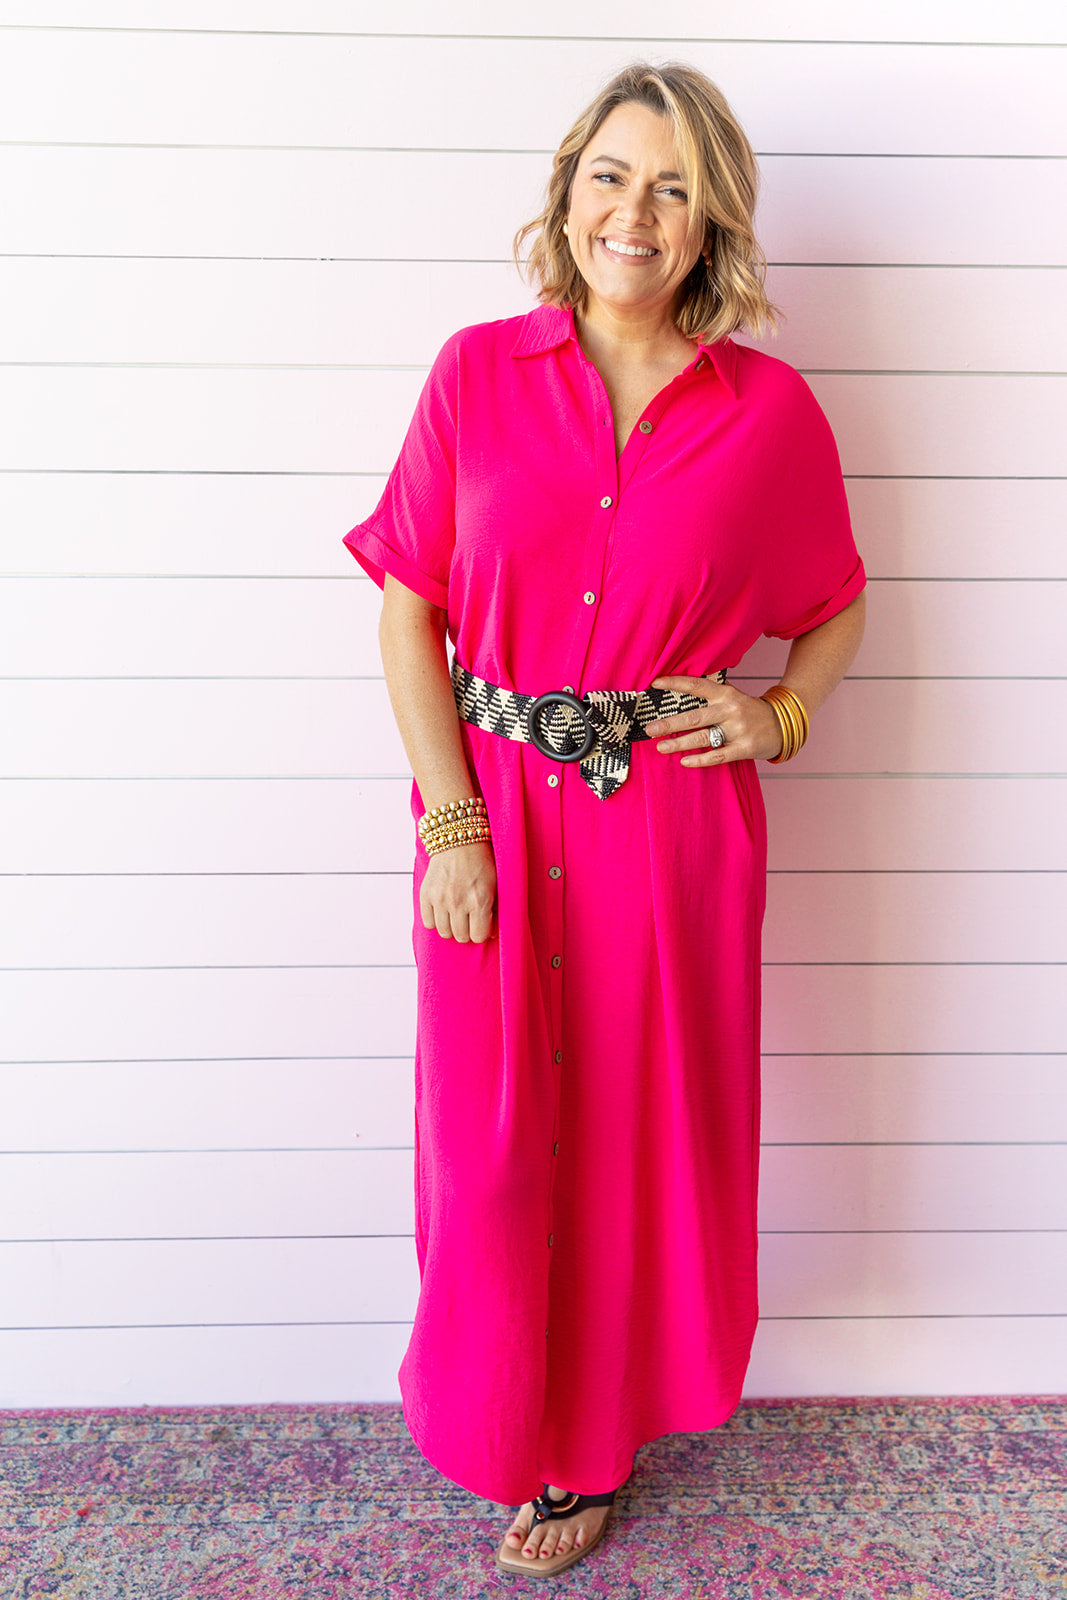 Madly In Love Maxi - Neon Pink